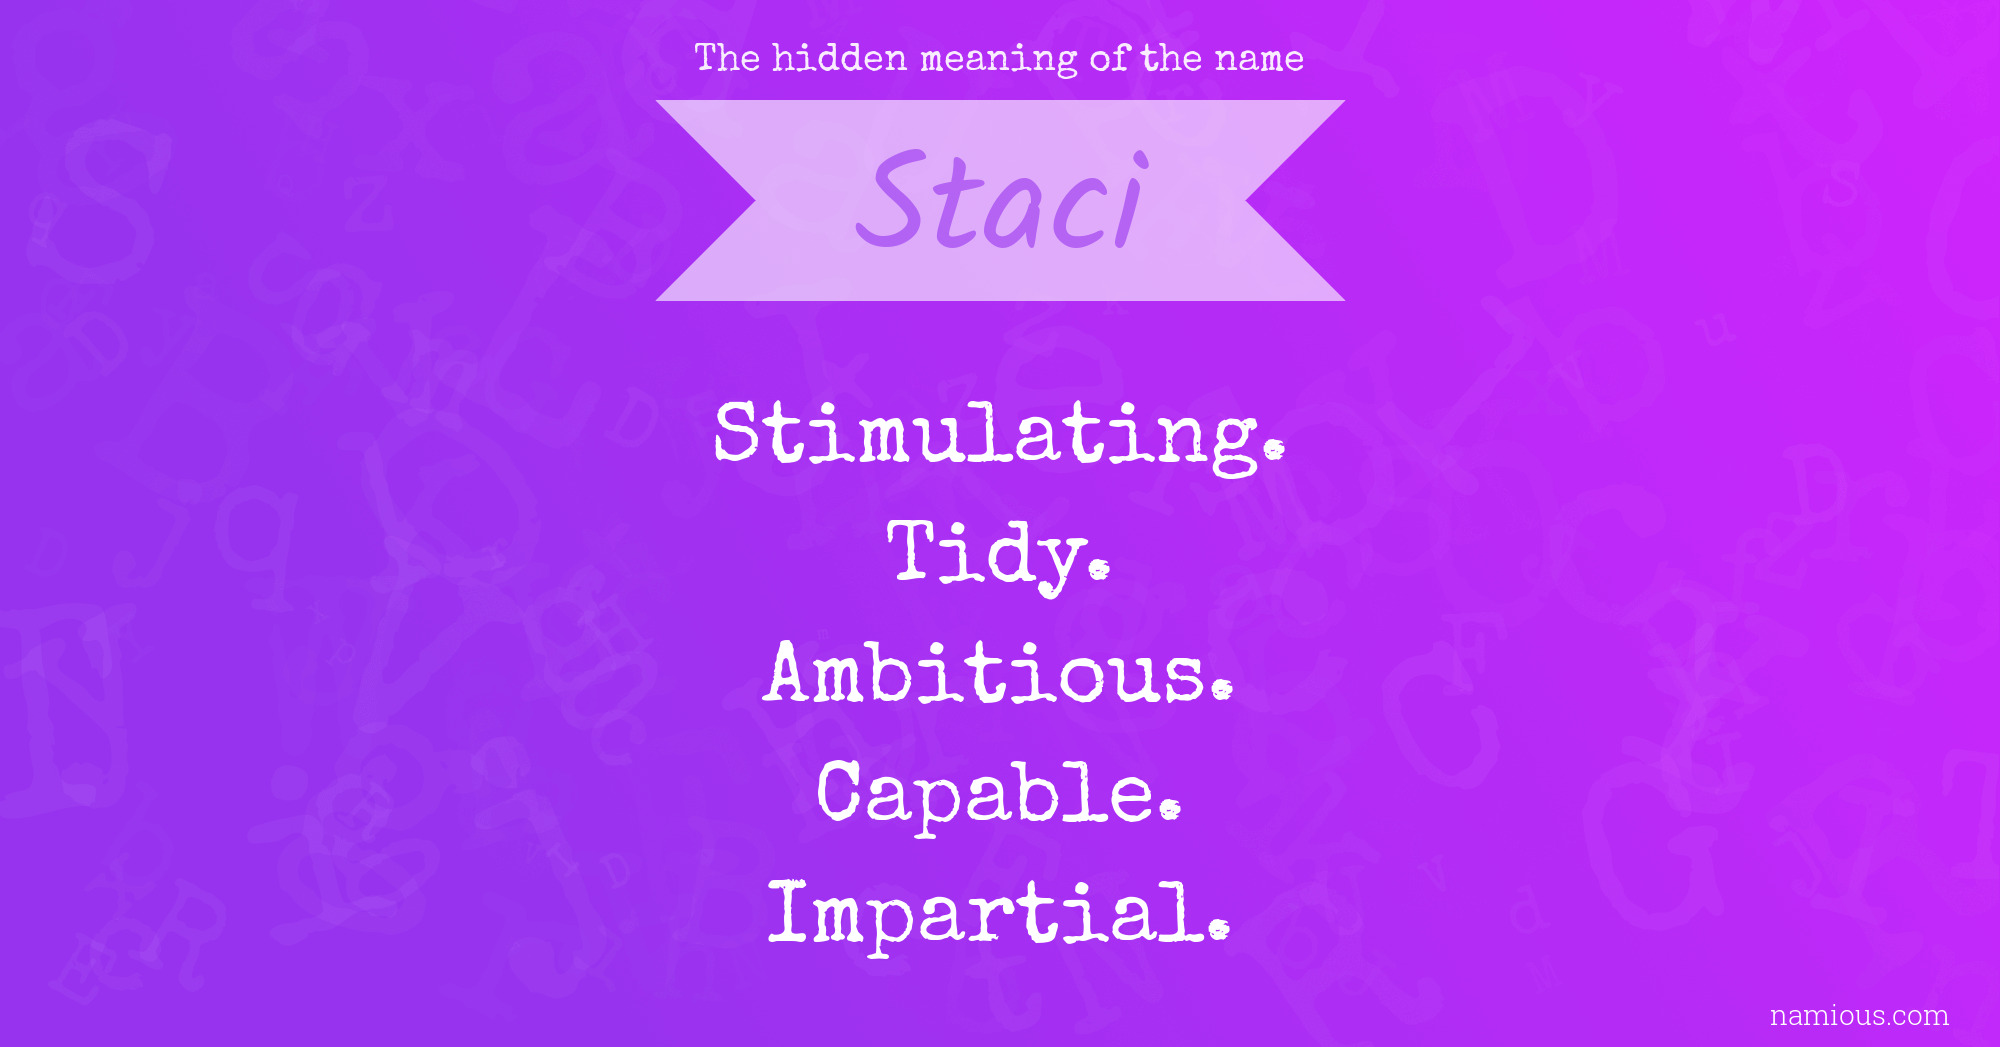 The hidden meaning of the name Staci